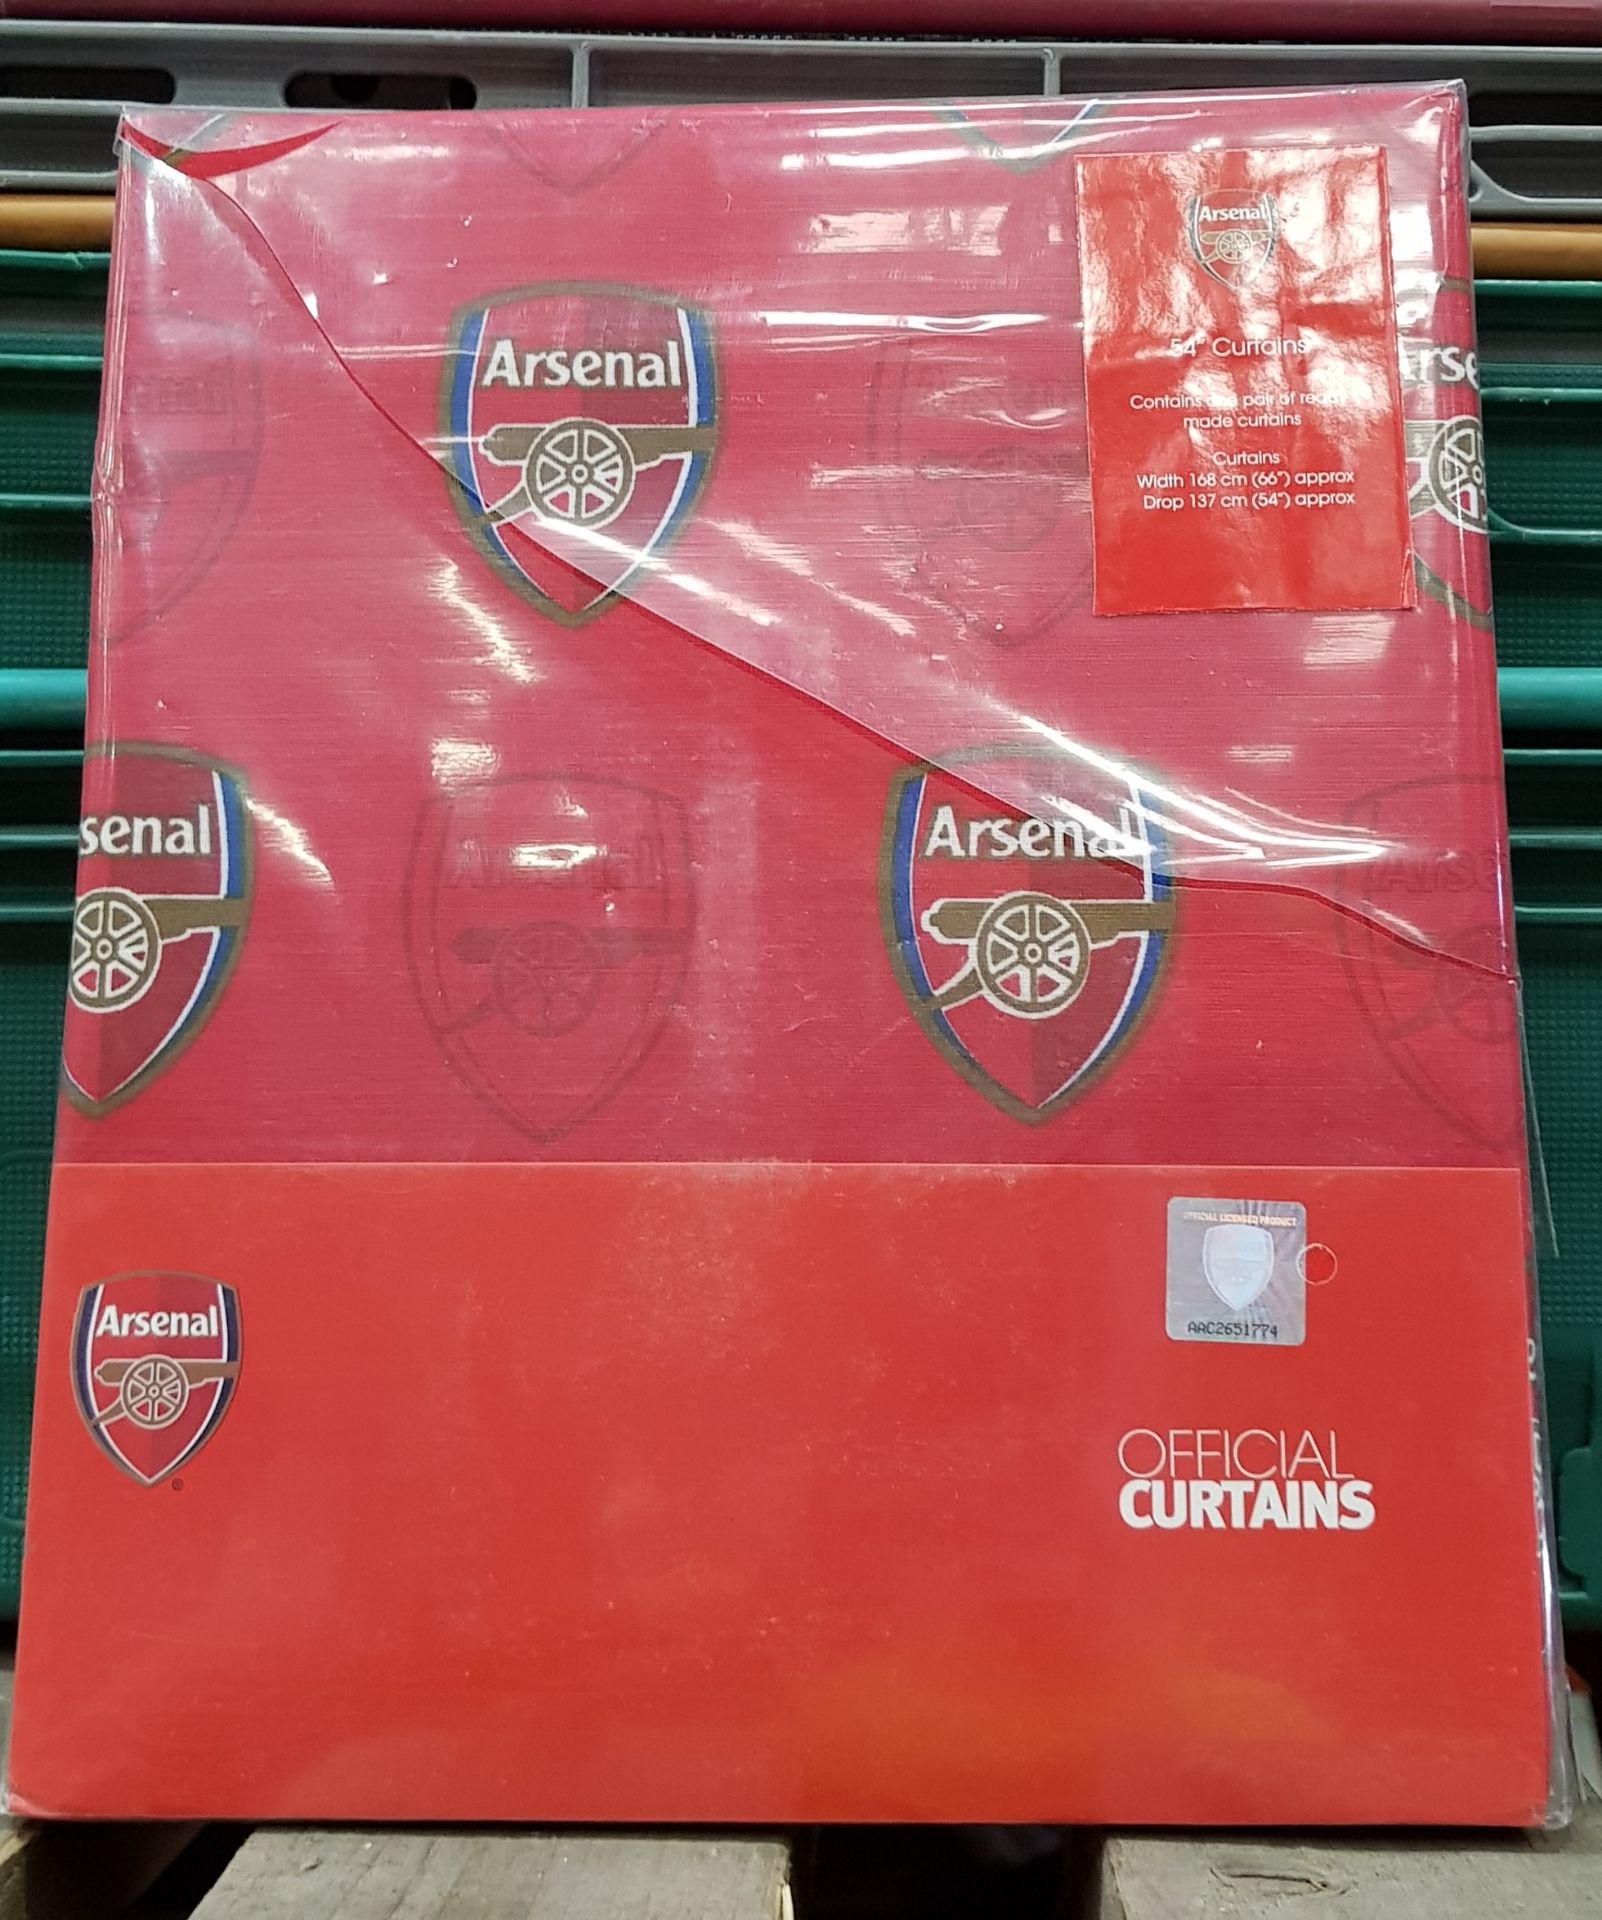 34 X BRAND NEW ARSENAL FOOTBALL CLUB REPEAT CREST PRINT CURTAINS - IN 3 BOXES -WIDTH 168 CM -DROP